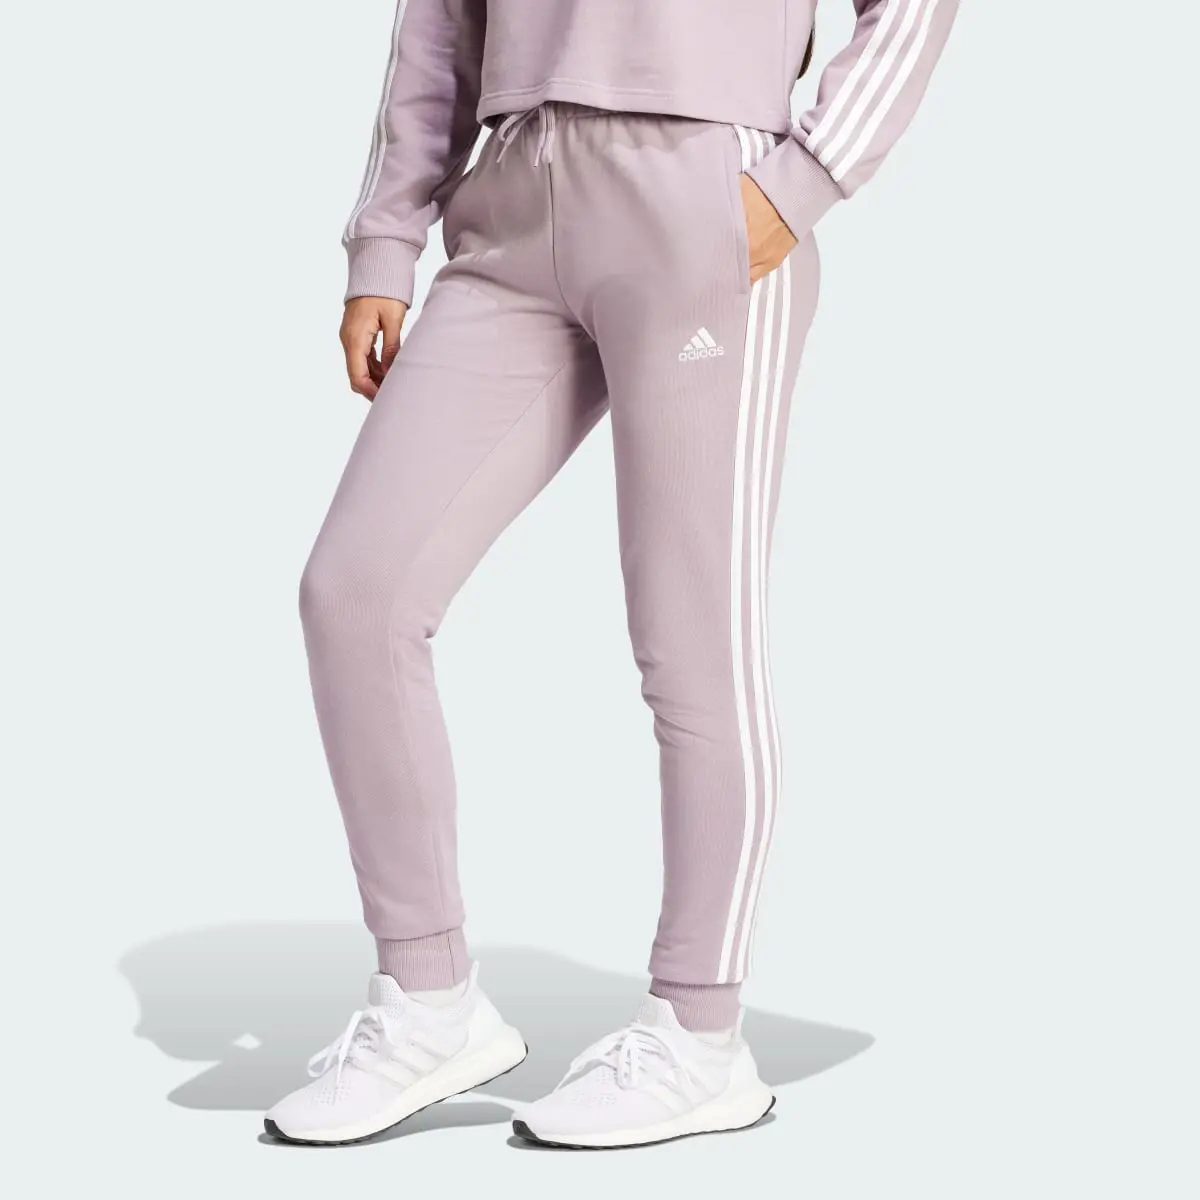 Adidas Essentials 3-Stripes French Terry Cuffed Pants. 1